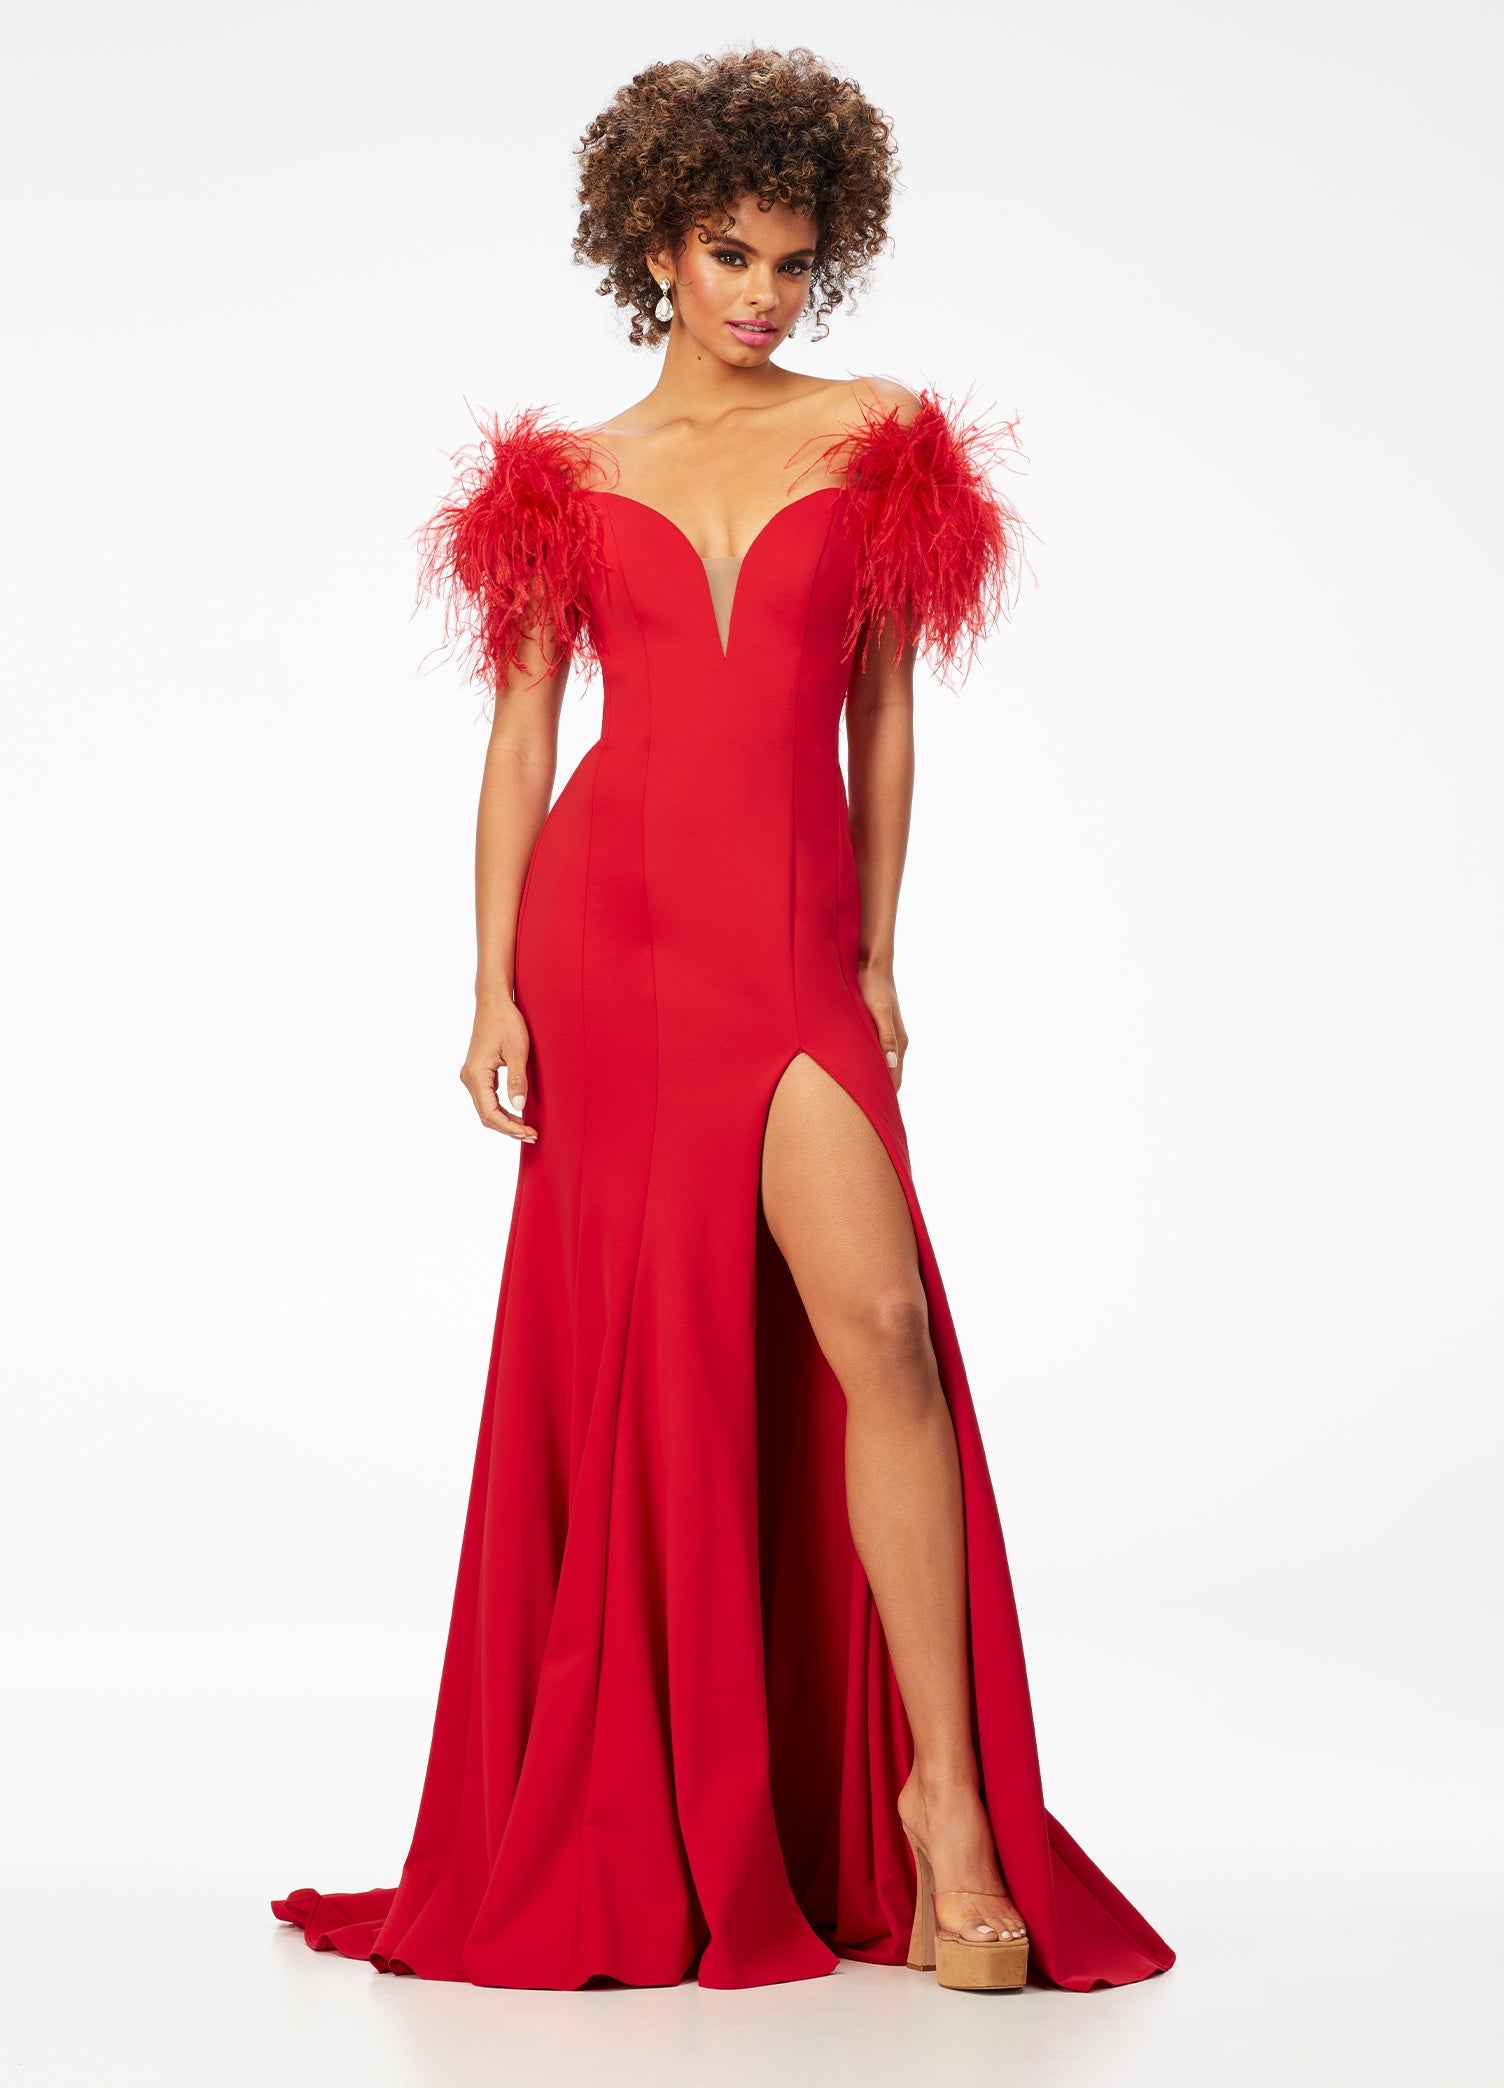 Ashley Lauren 11100 Feather trimmed Jumpsuit. This jumpsuit features a feather boa wrapped around your neckline, arms and back.  The fabric is scuba and it has flare in the pant leg. Red